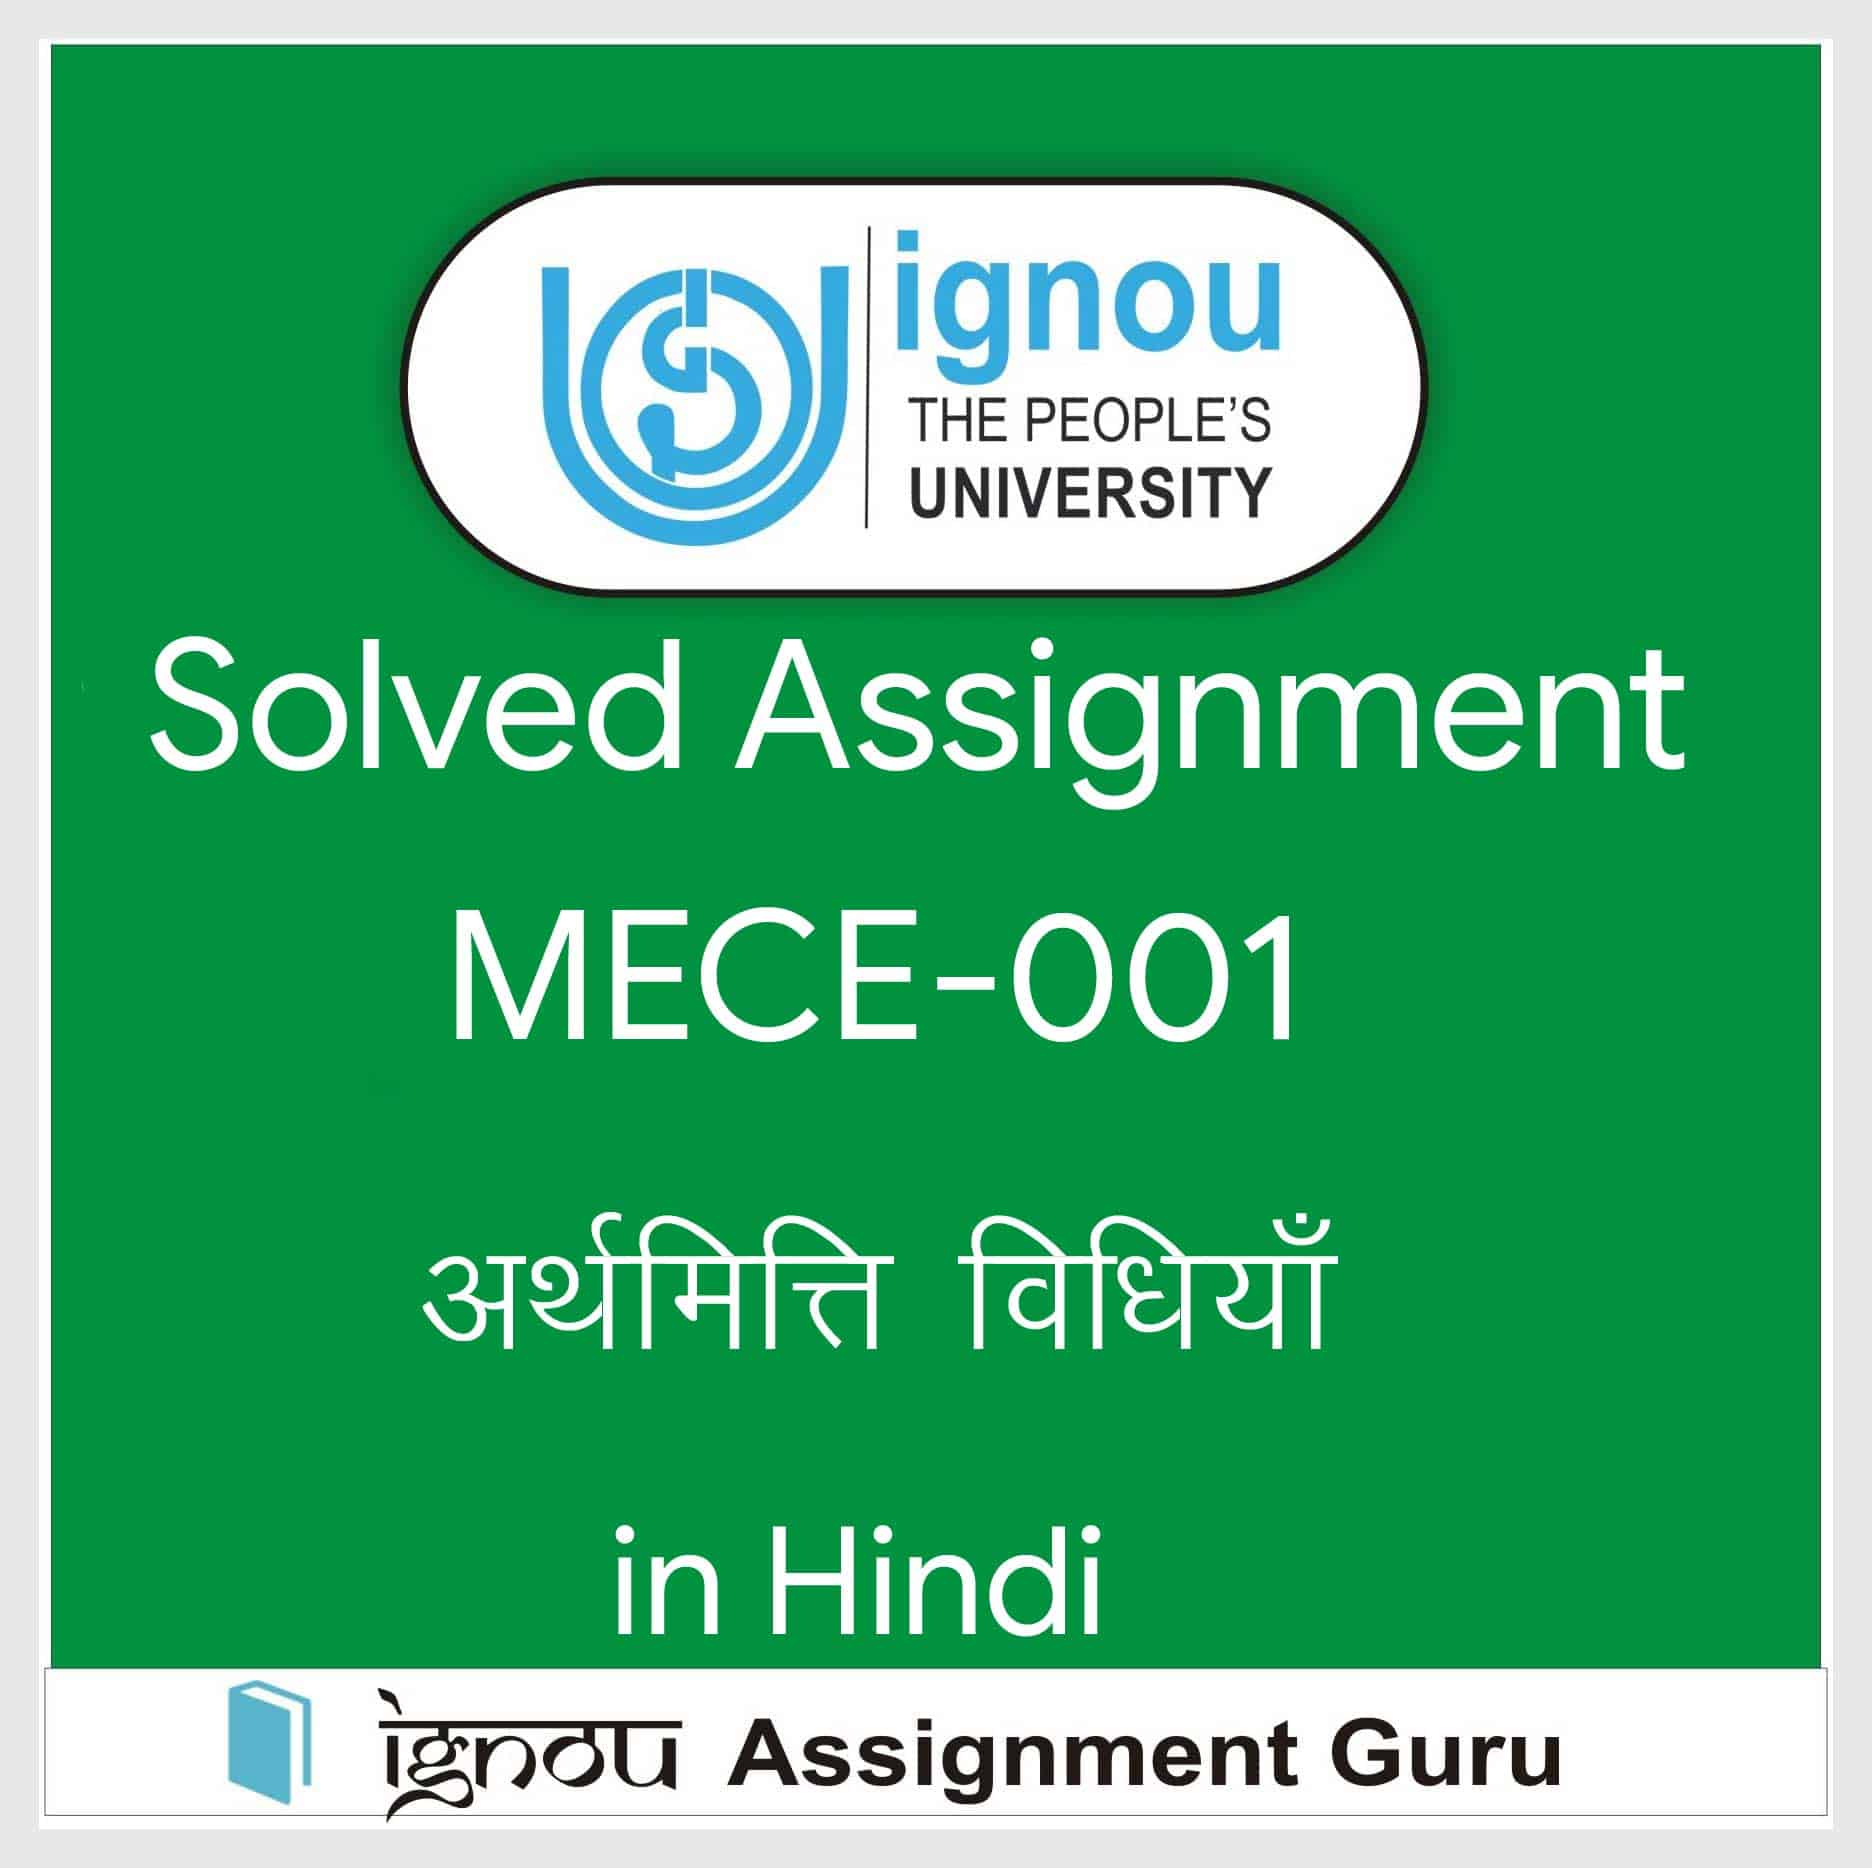 MECE-001 अर्थमिति विधियाँ in Hindi Solved Assignment 2020-2021